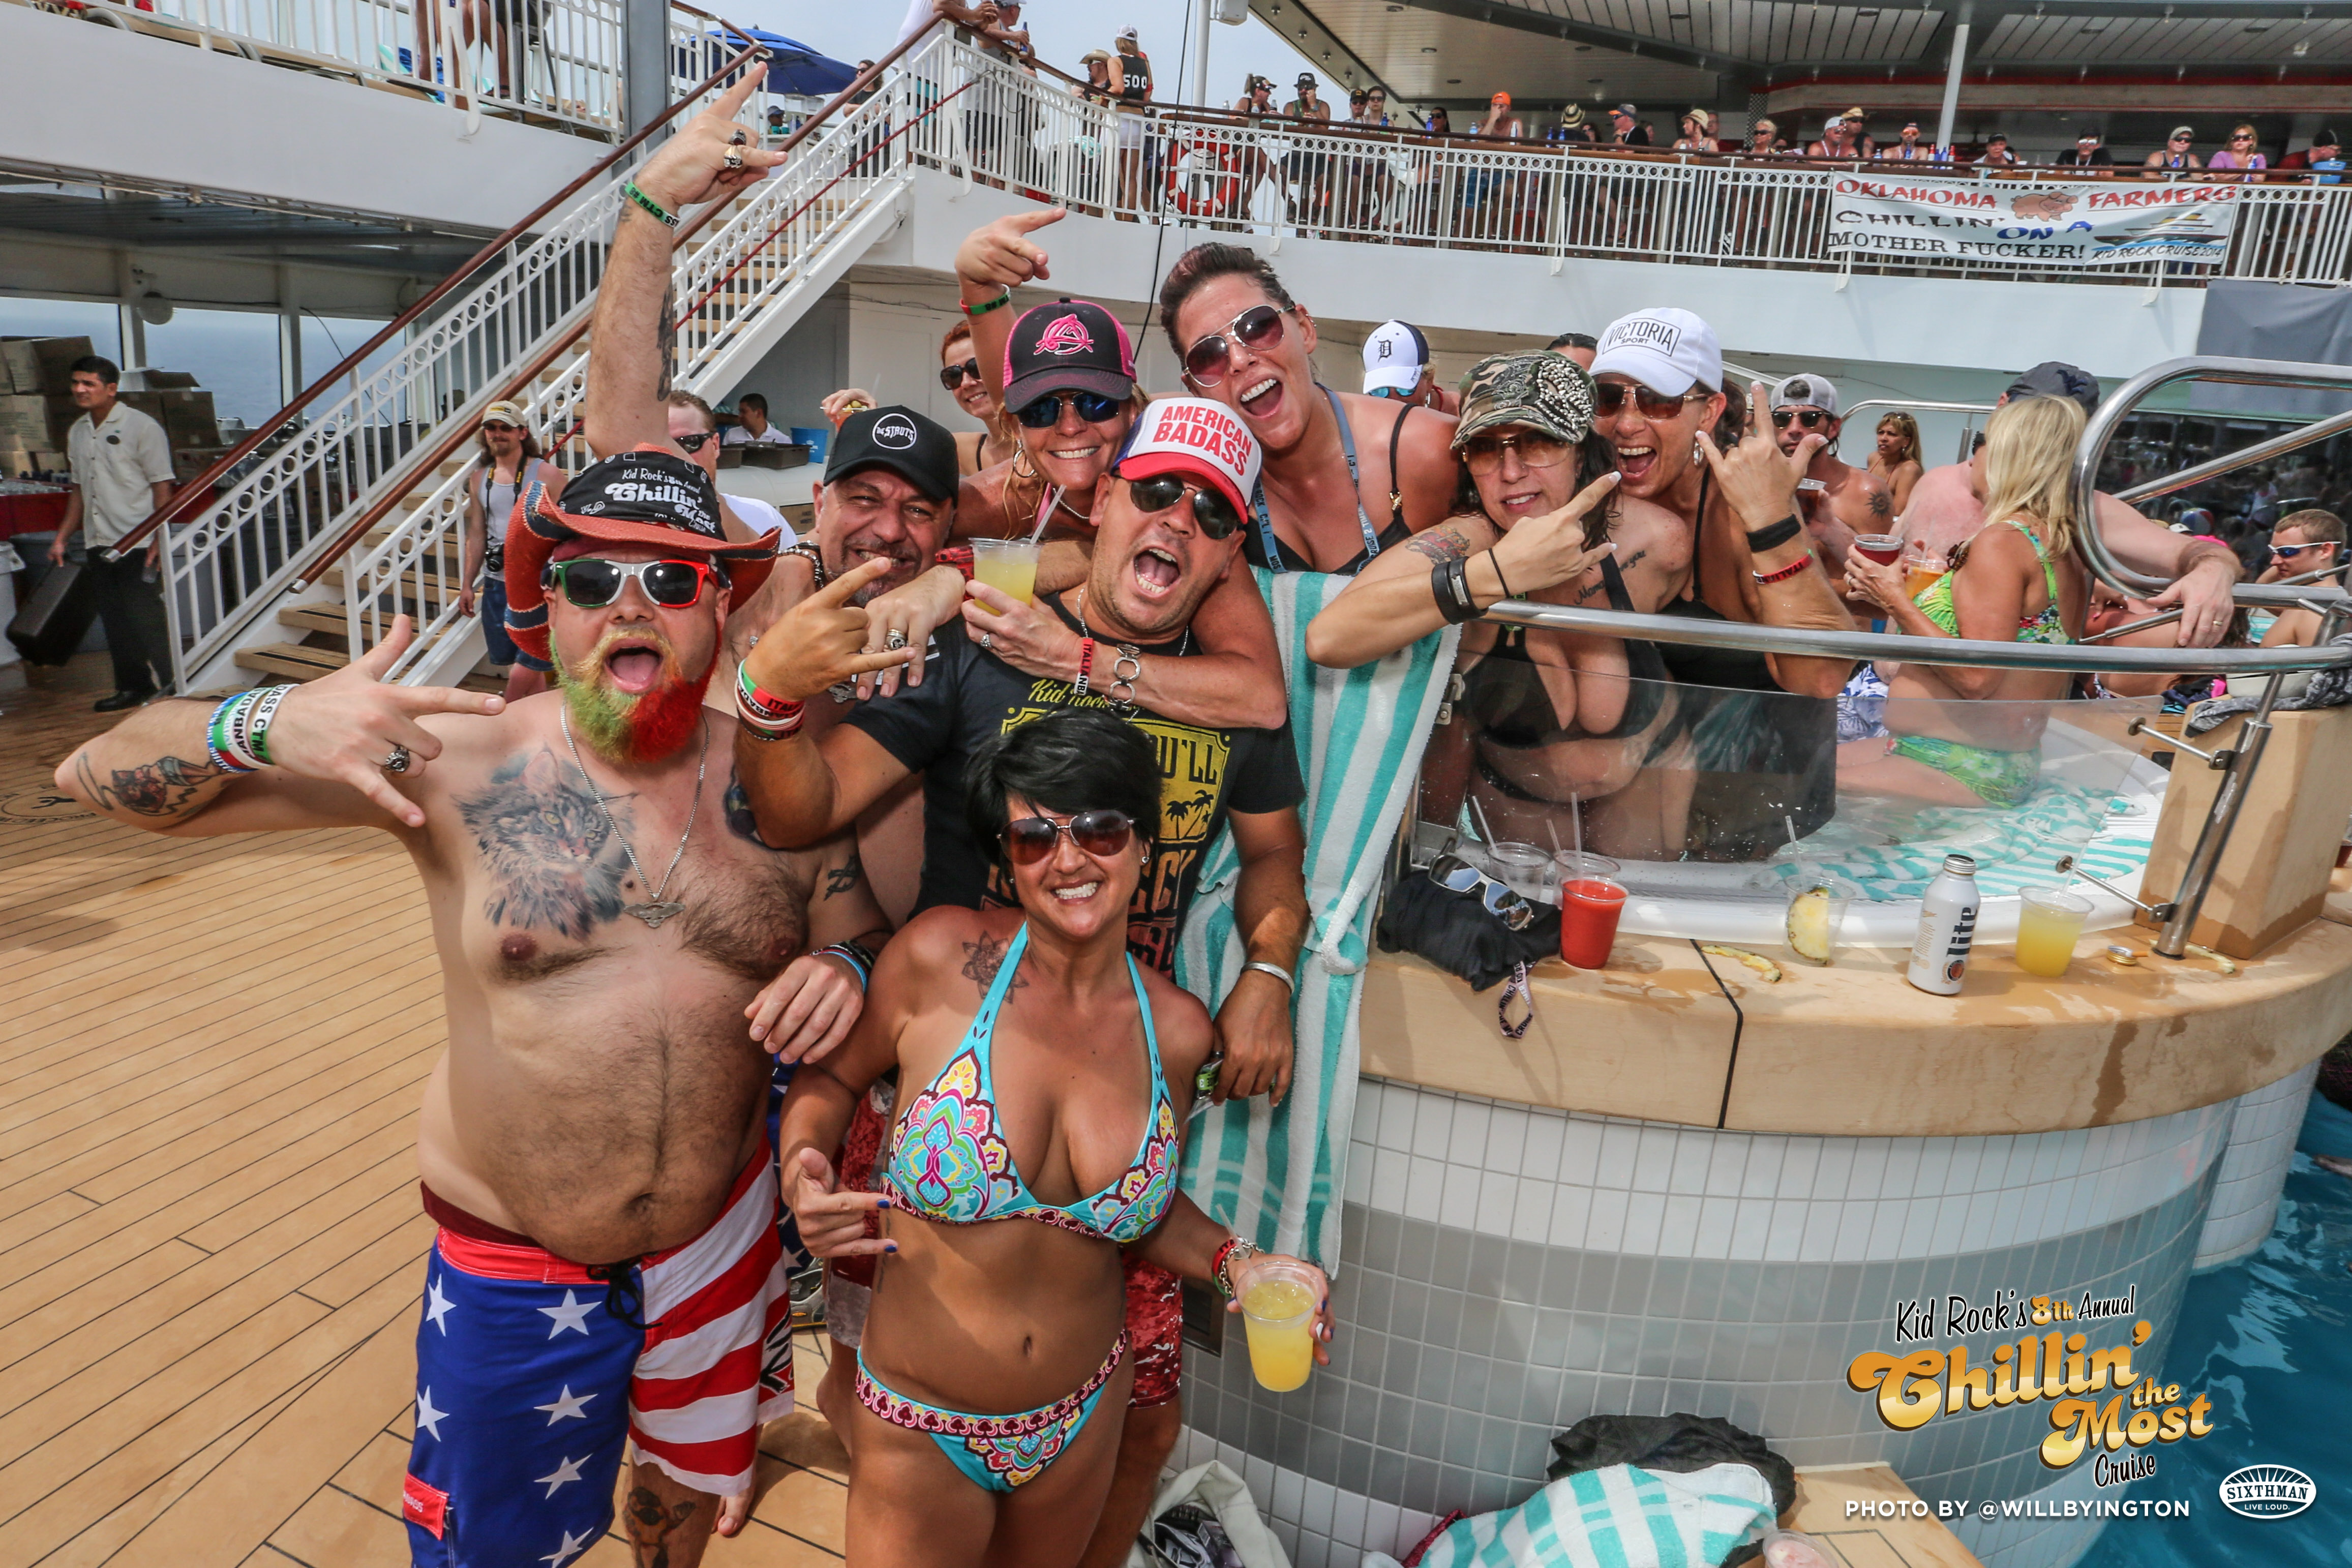 news for tampa swingers cruise Fucking Pics Hq